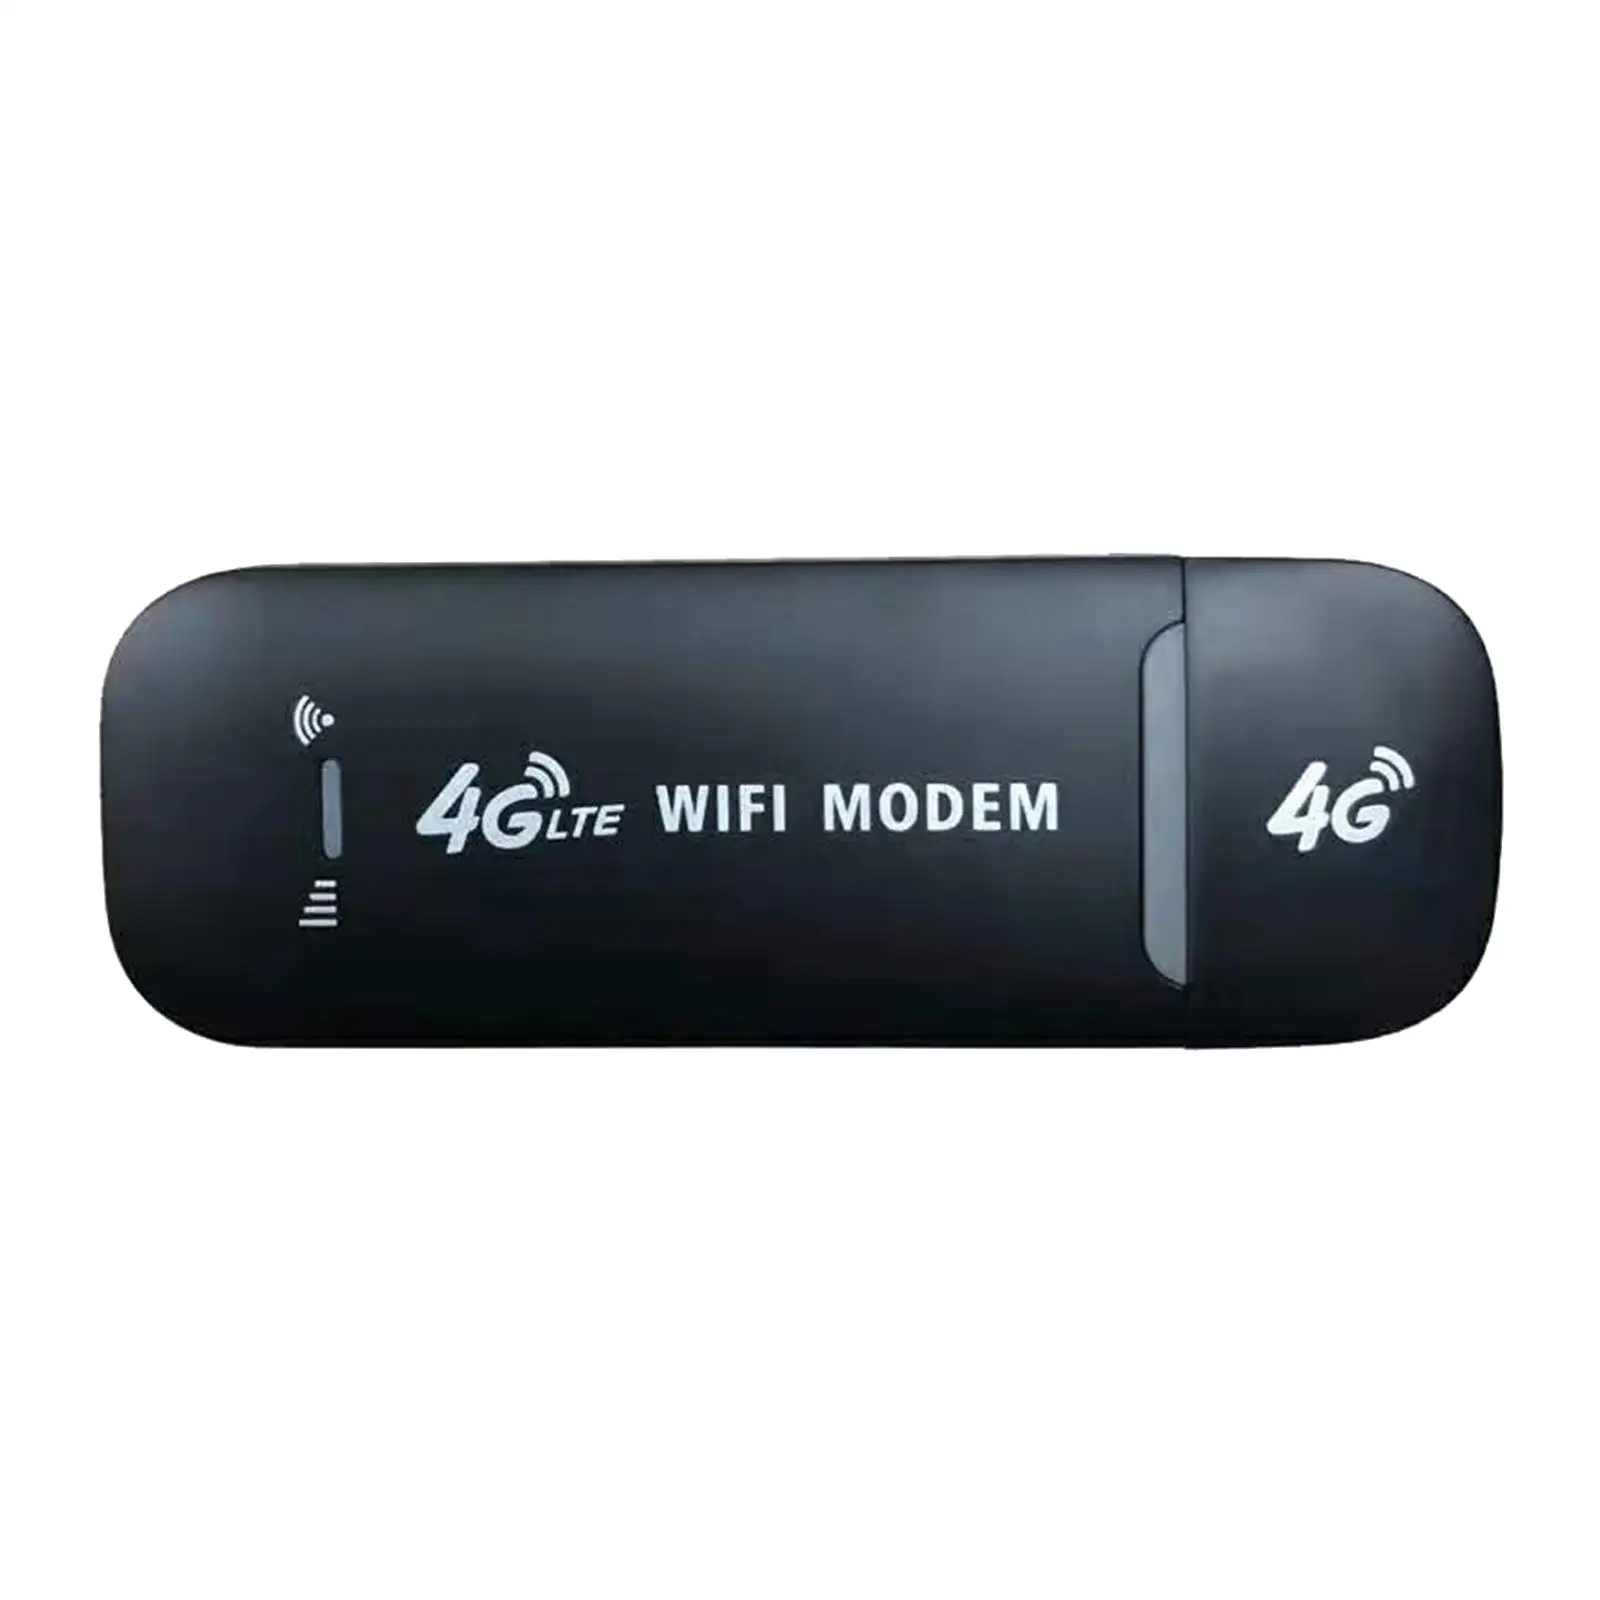  4G LTE USB Modem Dongle 150Mbps Unlocked WiFi Wireless Network Adapter for Laptop PC Network Card Unlocked WiFi Hotspot Router